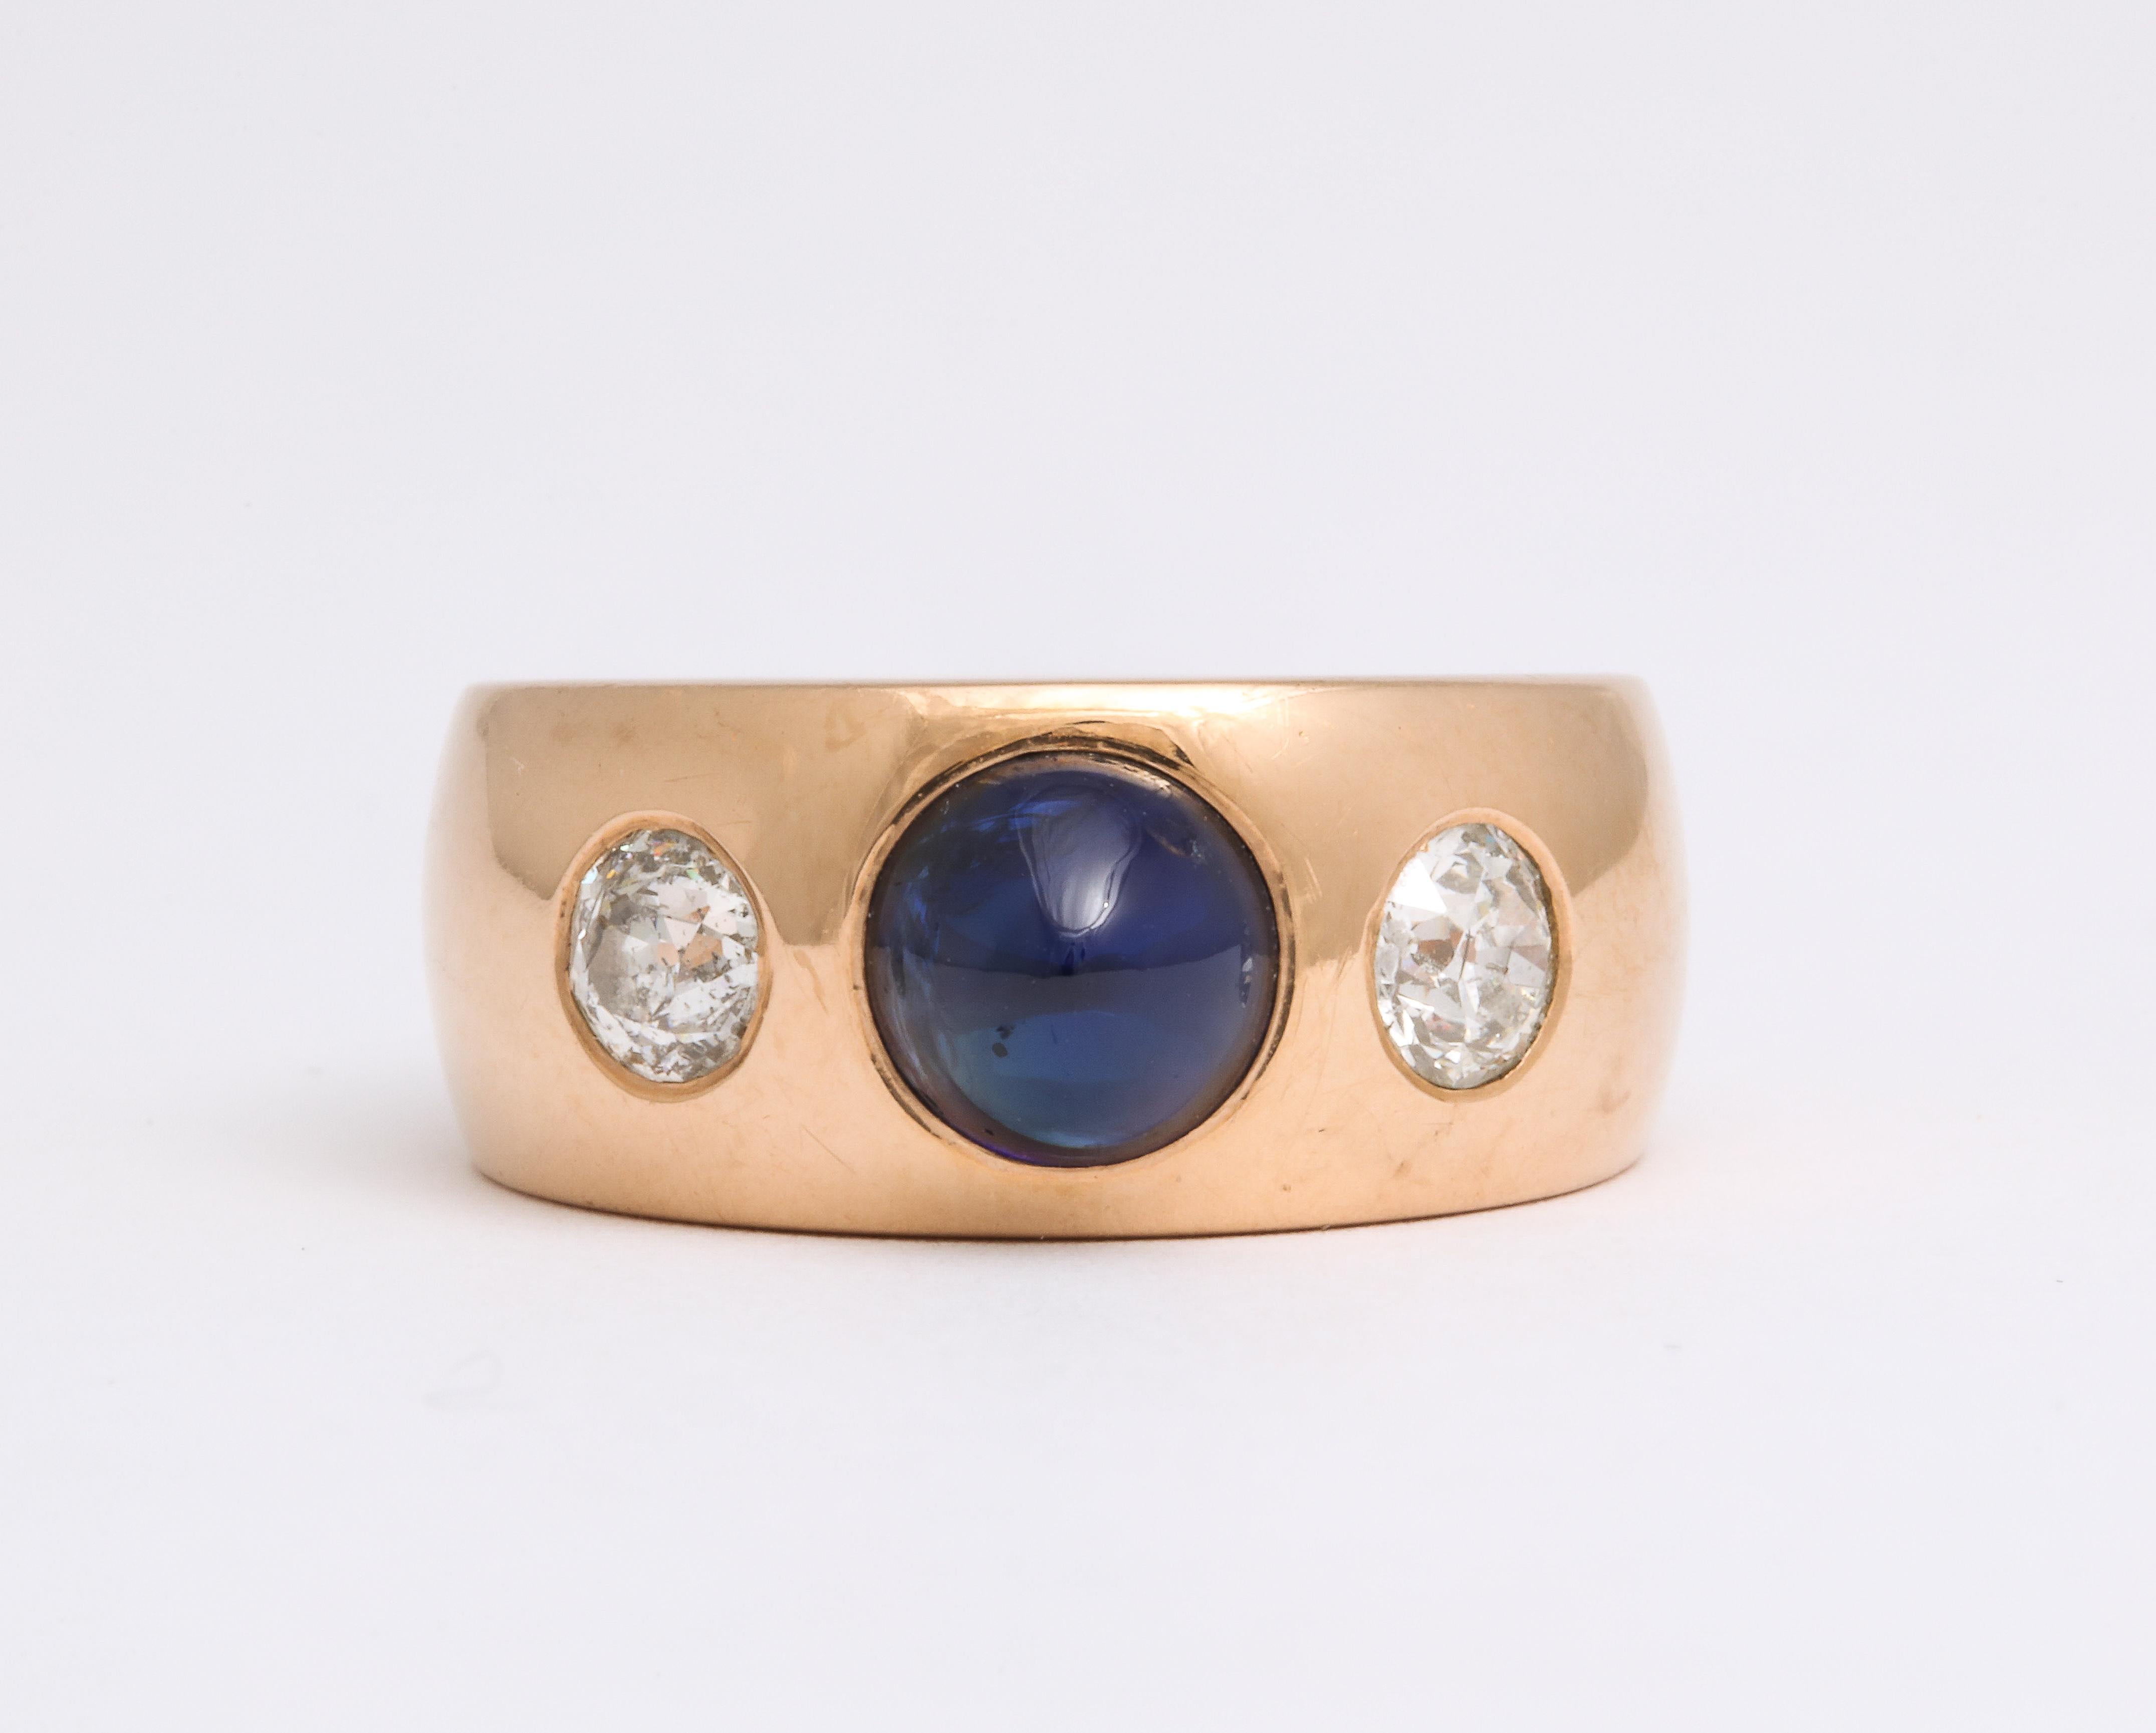 Solidly Art Deco in design, solid in weight, this stunning 18 Kt gold band is set with a sugarloaf natural sapphire, (a cabochon cut gem that rises to a dome), weighing 1.6 Cts and two European cut diamonds totaling approximately 1 Ct in weight. The